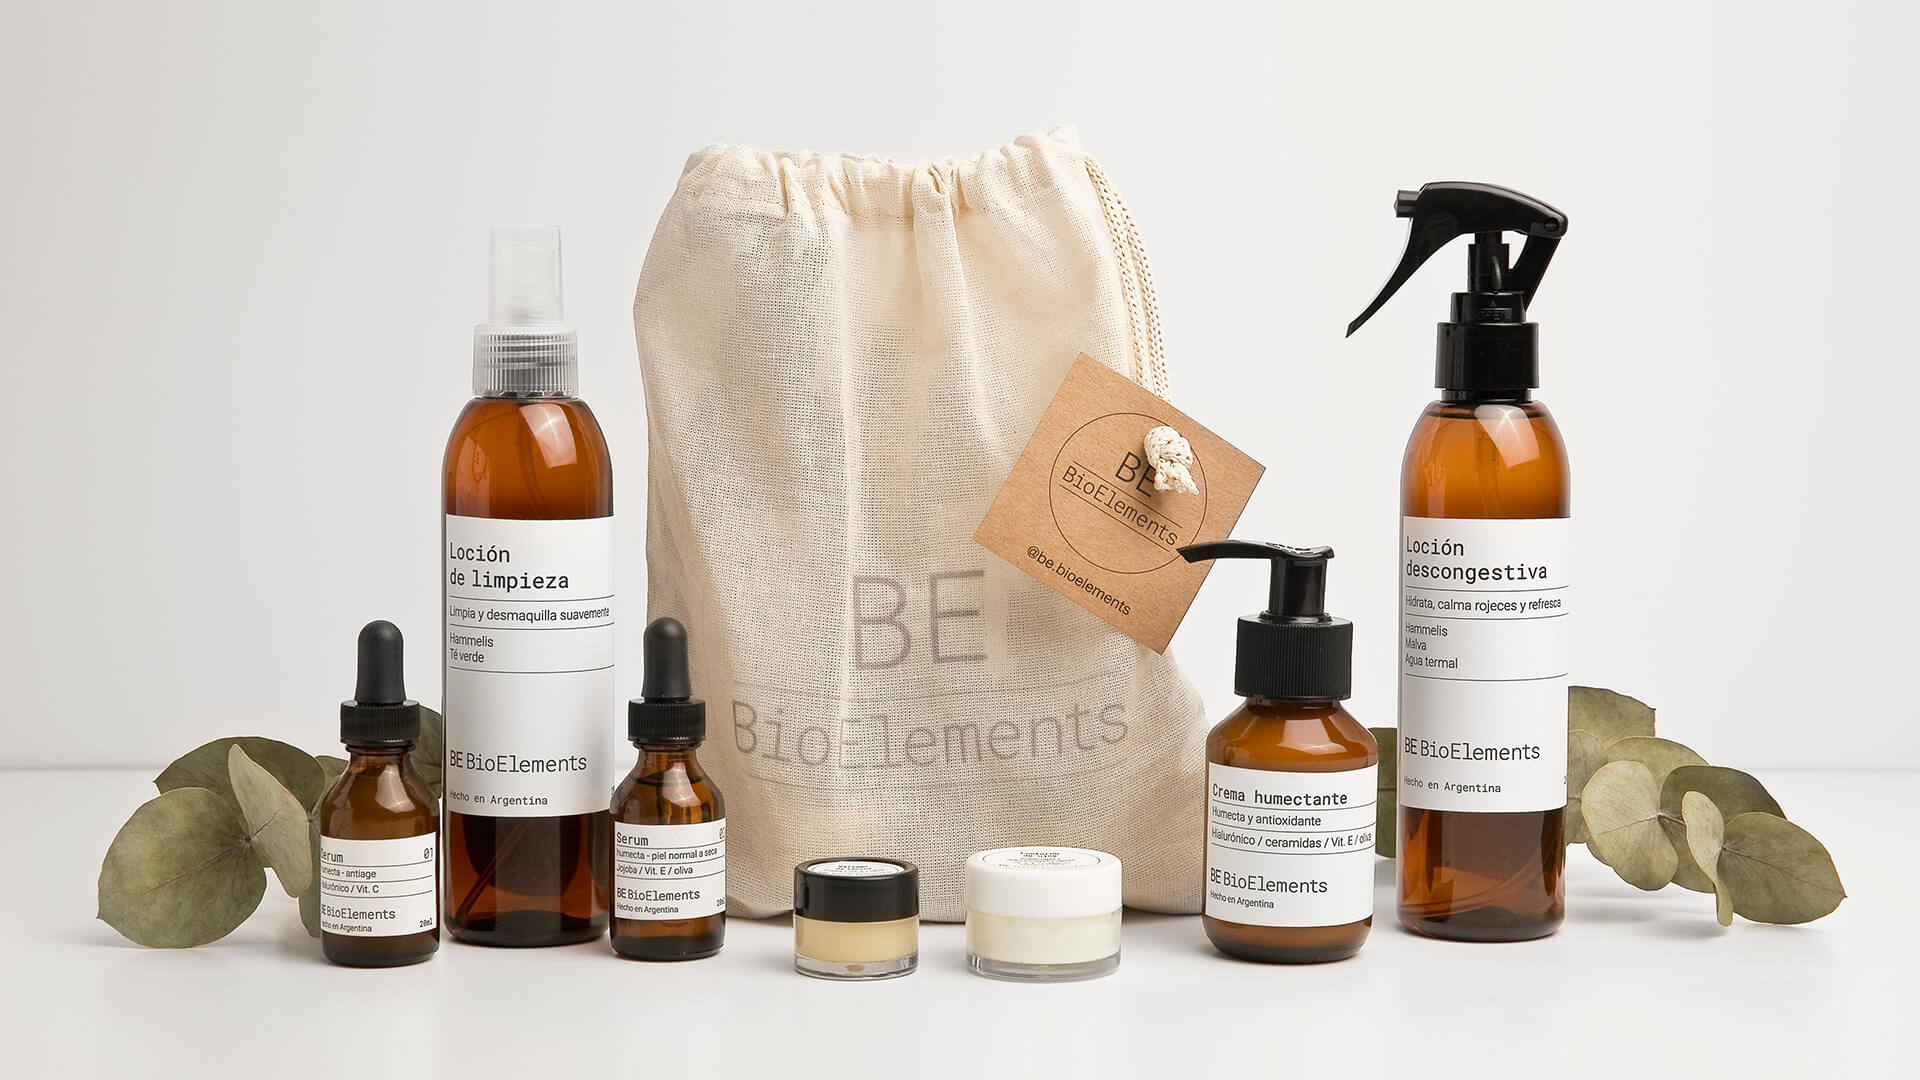 Identity and packaging for BE BioElements skincare cosmetics by FUERA